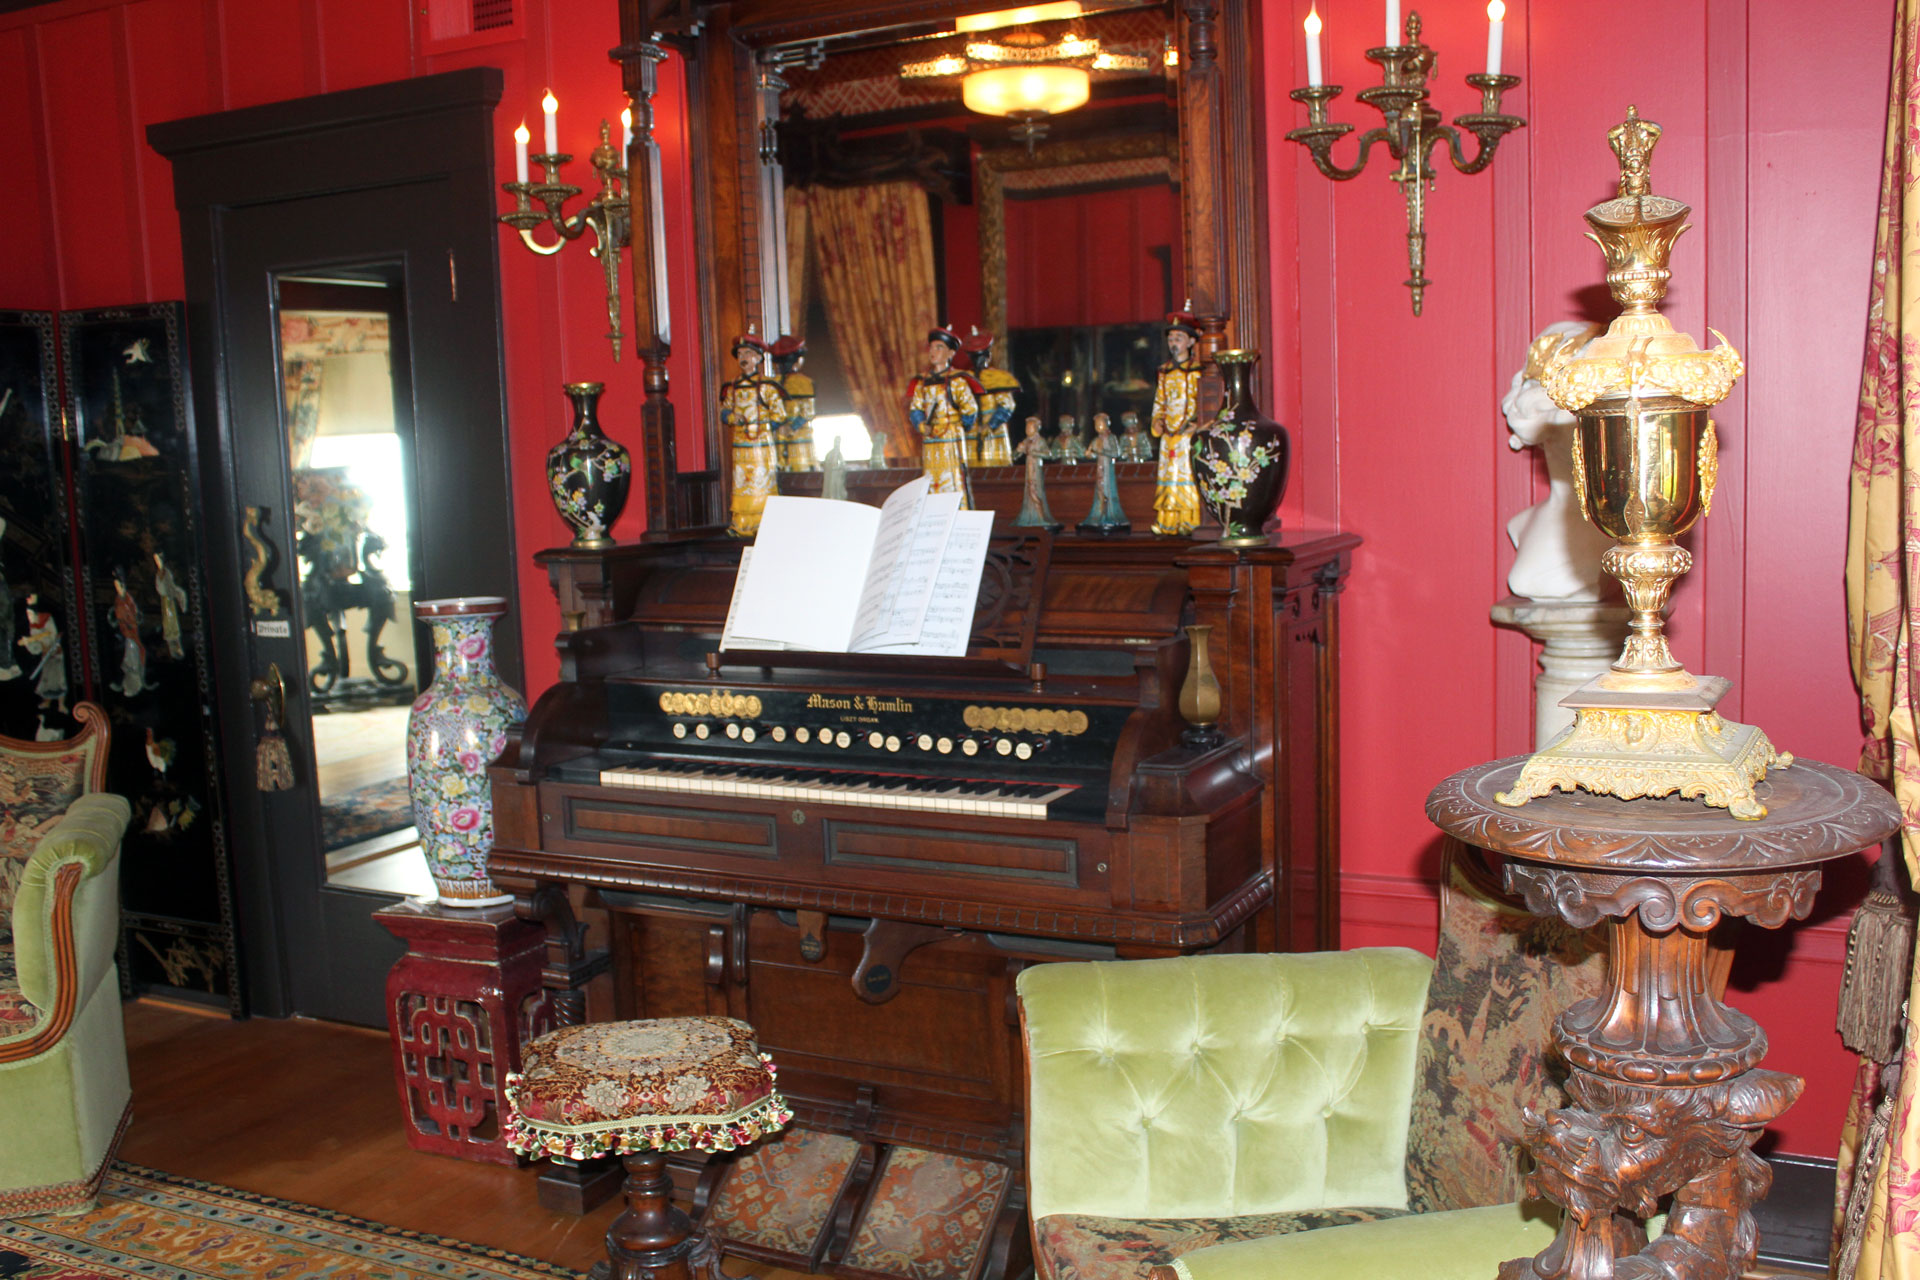 An ornately decorated room with a harmonium, a pump organ, dominating.